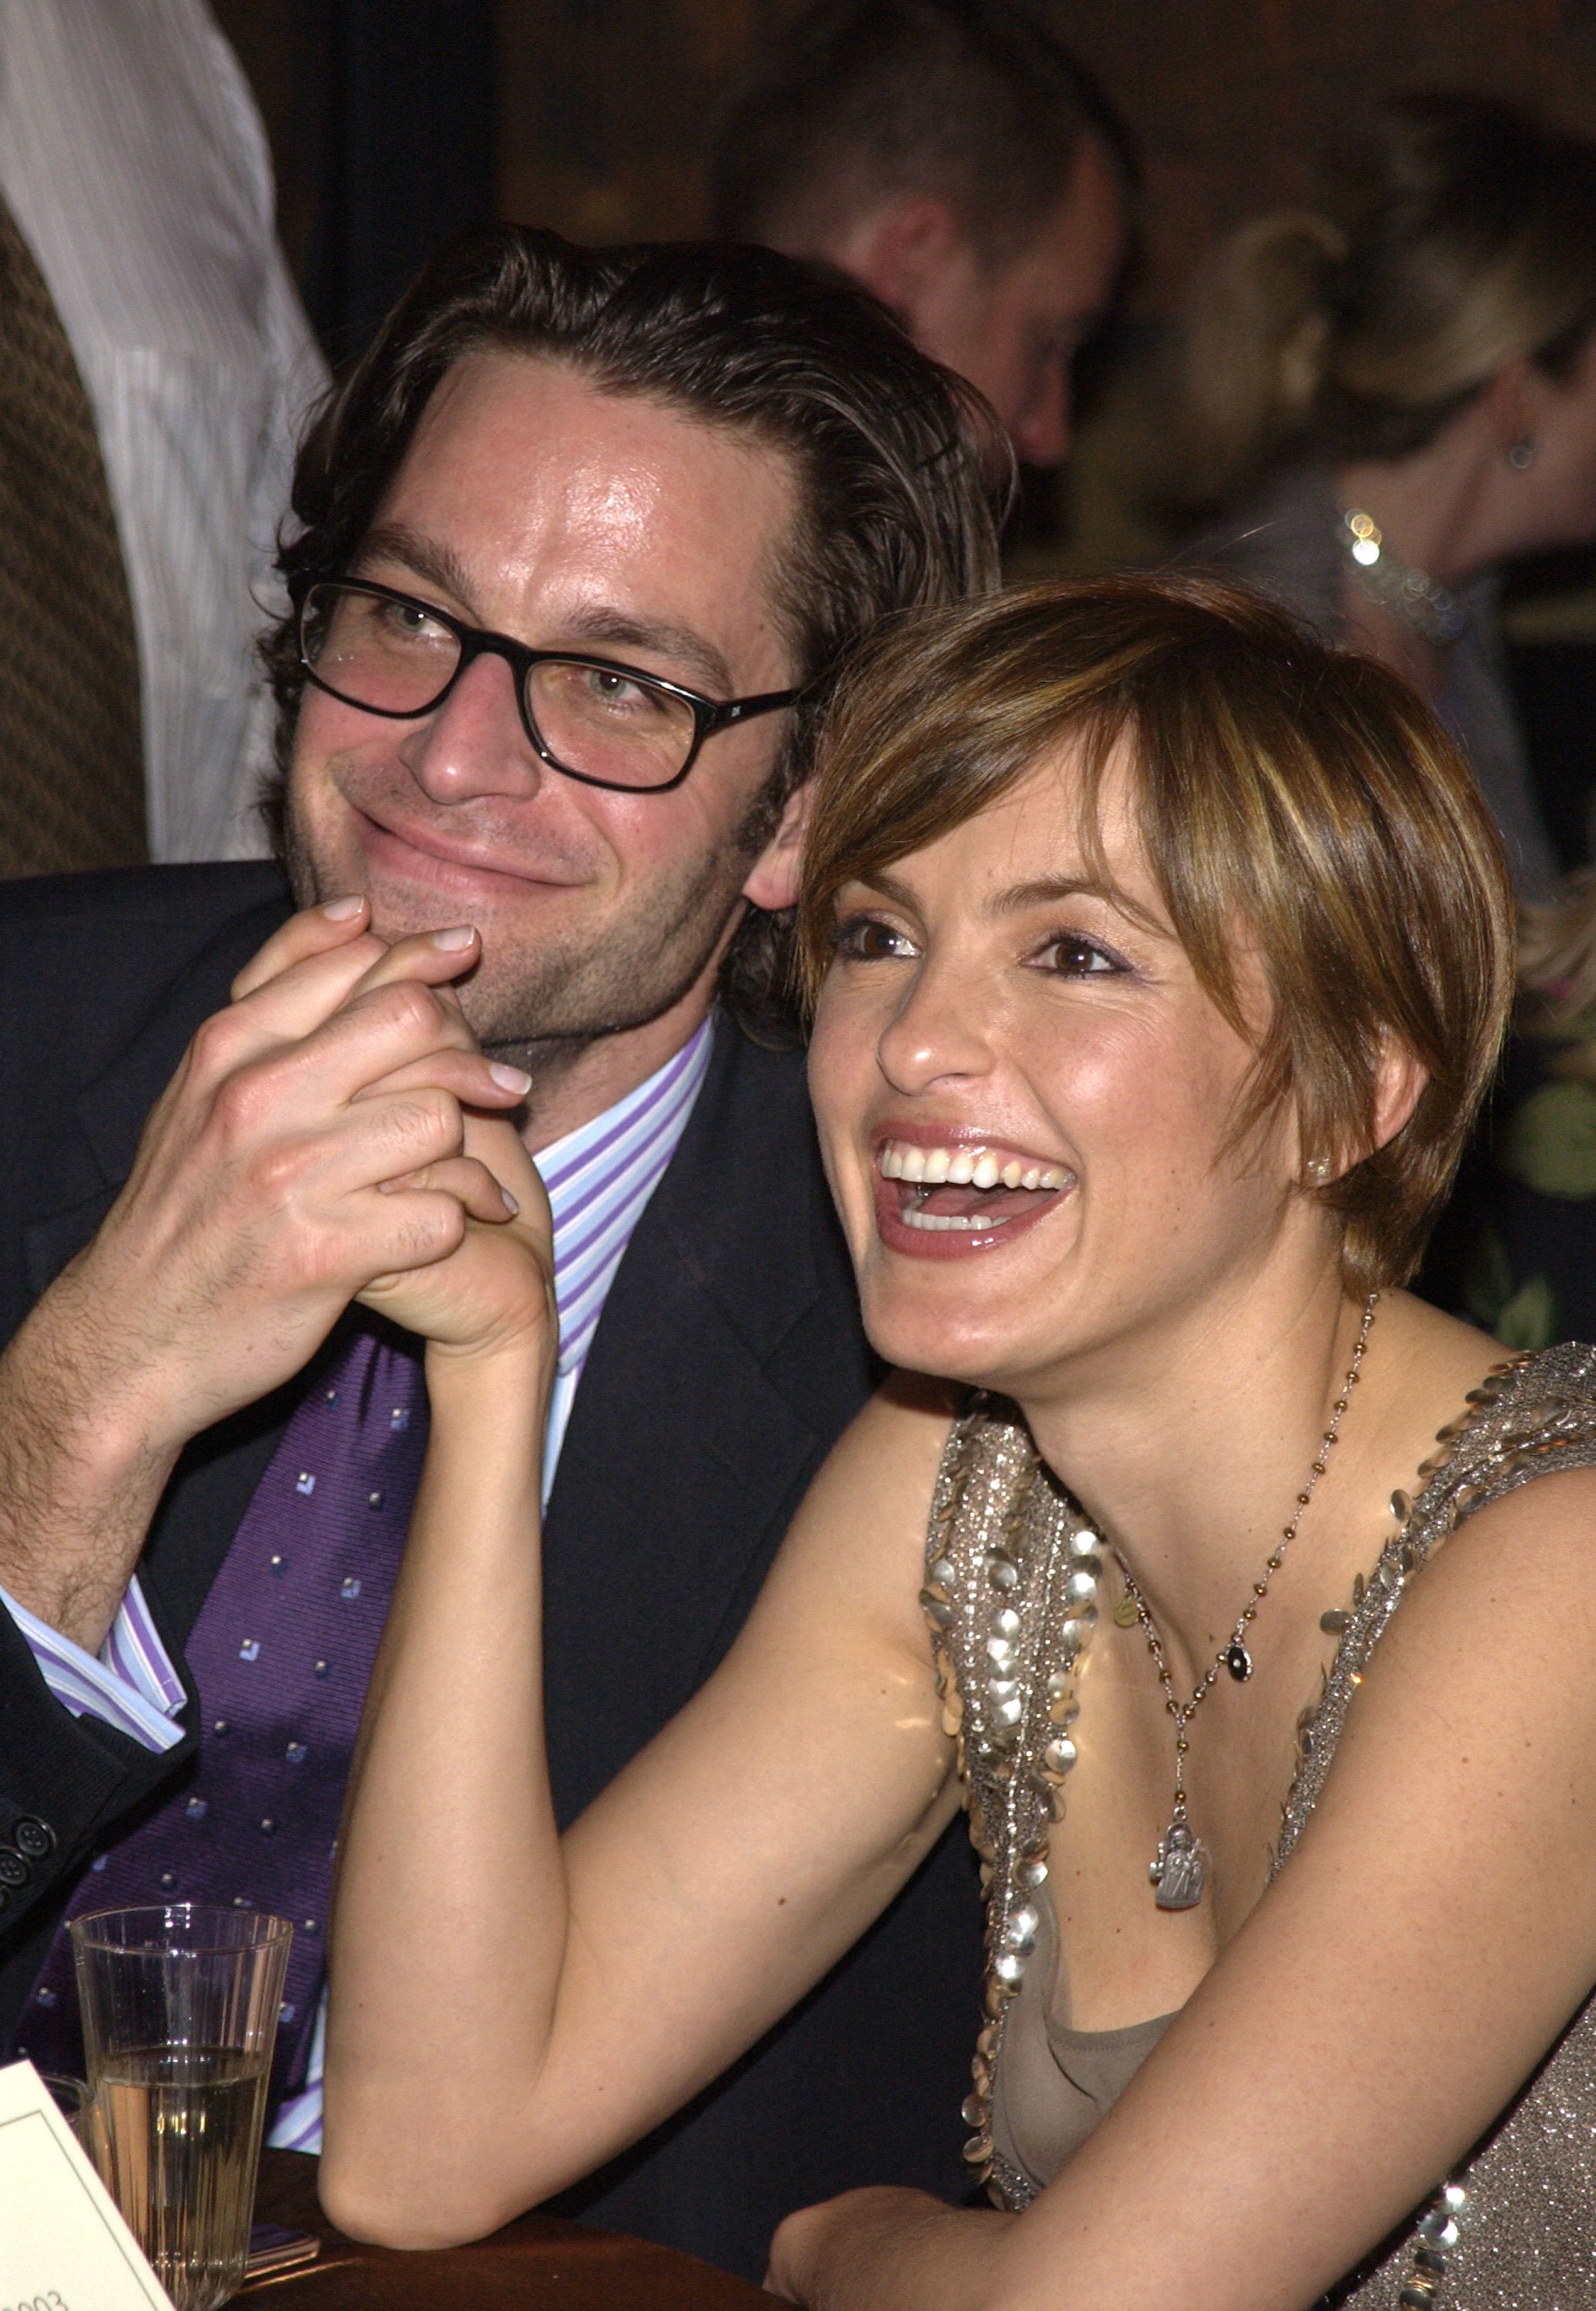 Peter Herman and Mariska Hargitay during Entertainment Weekly's 9th Annual Academy Awards Viewing Party in New York City on March 23, 2003 | Source: Getty Images